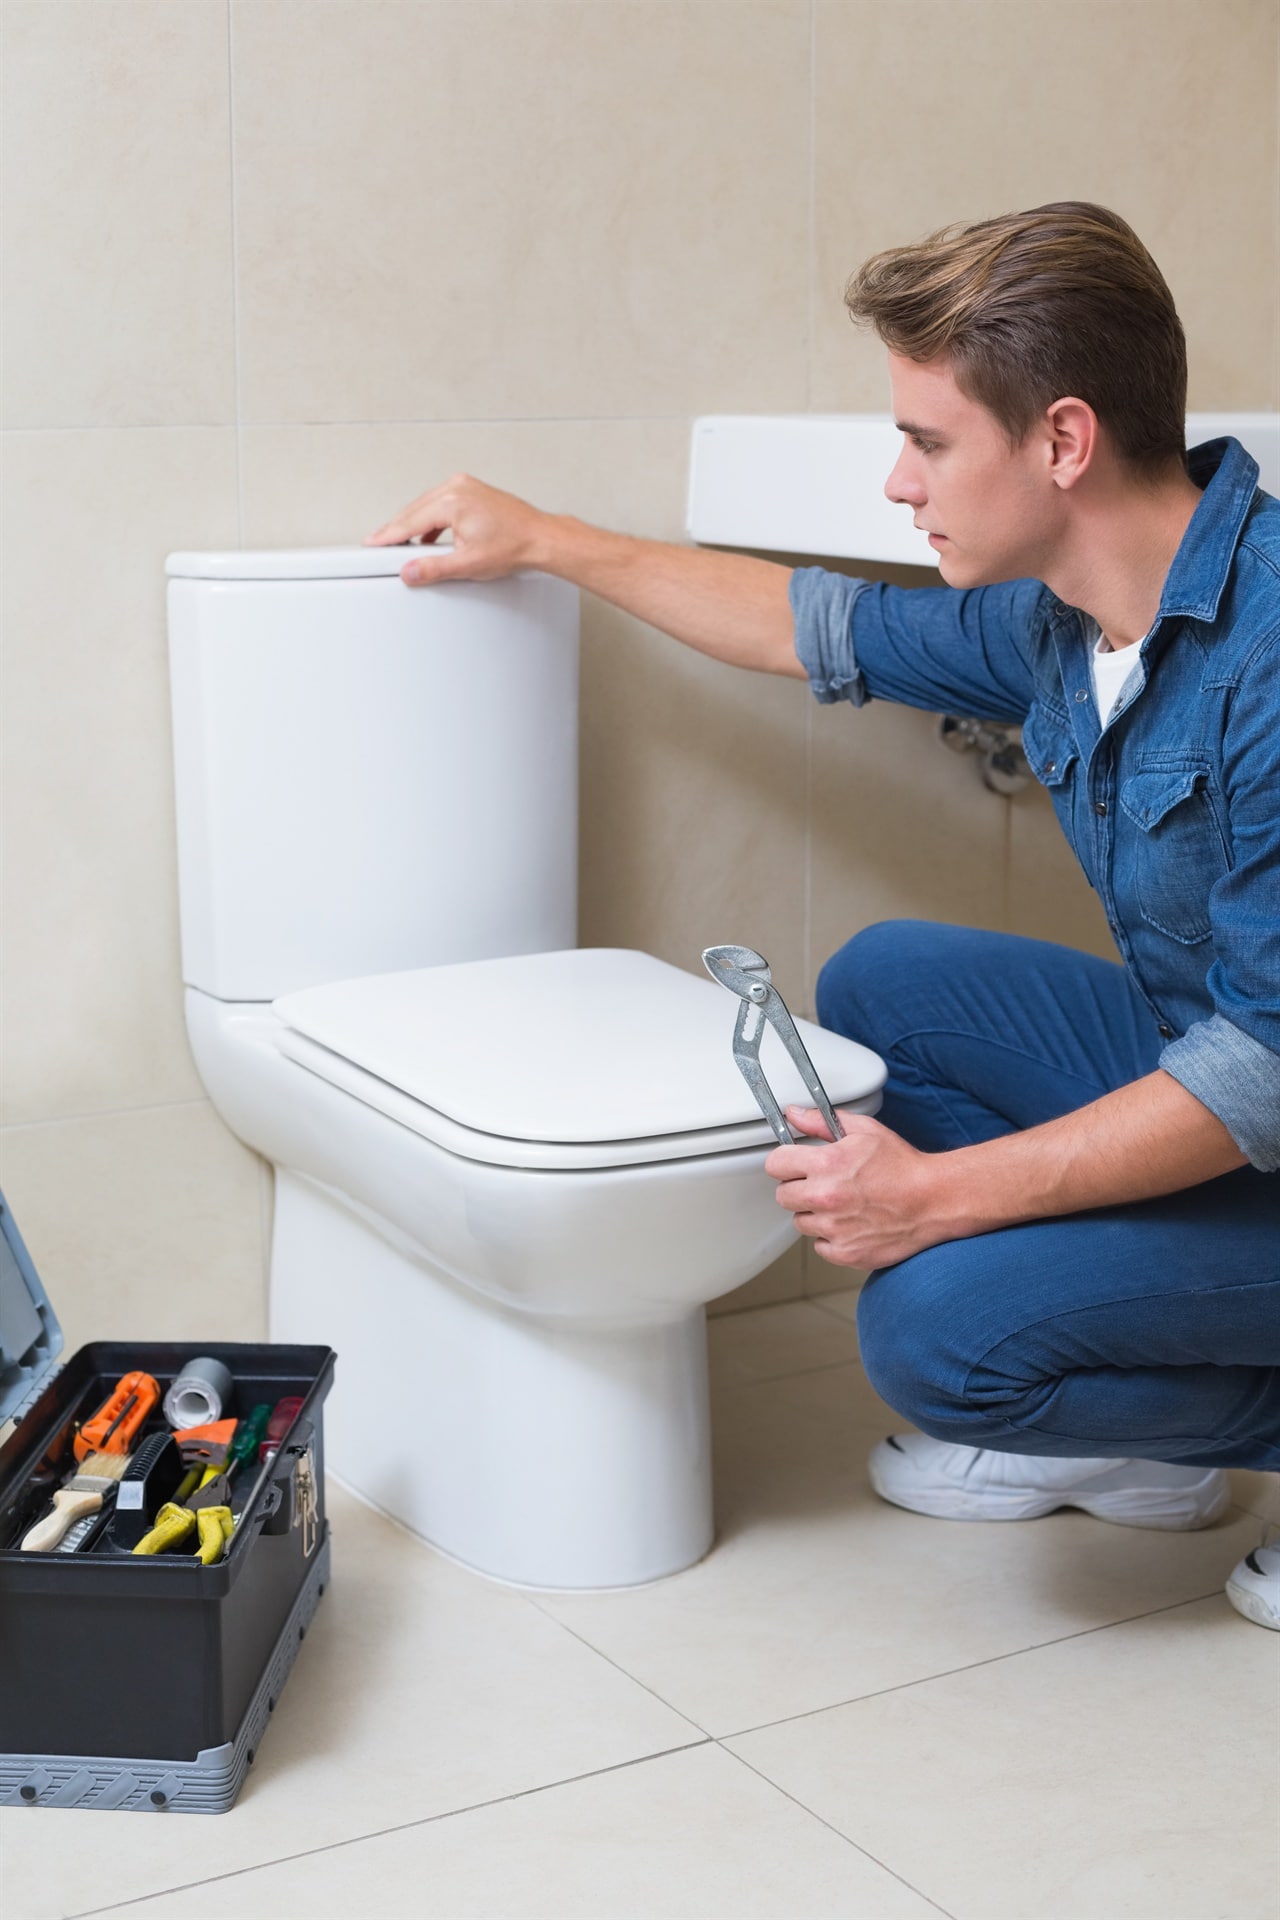 blocked toilet services provided by Wrench It Up plumbing and mechanical